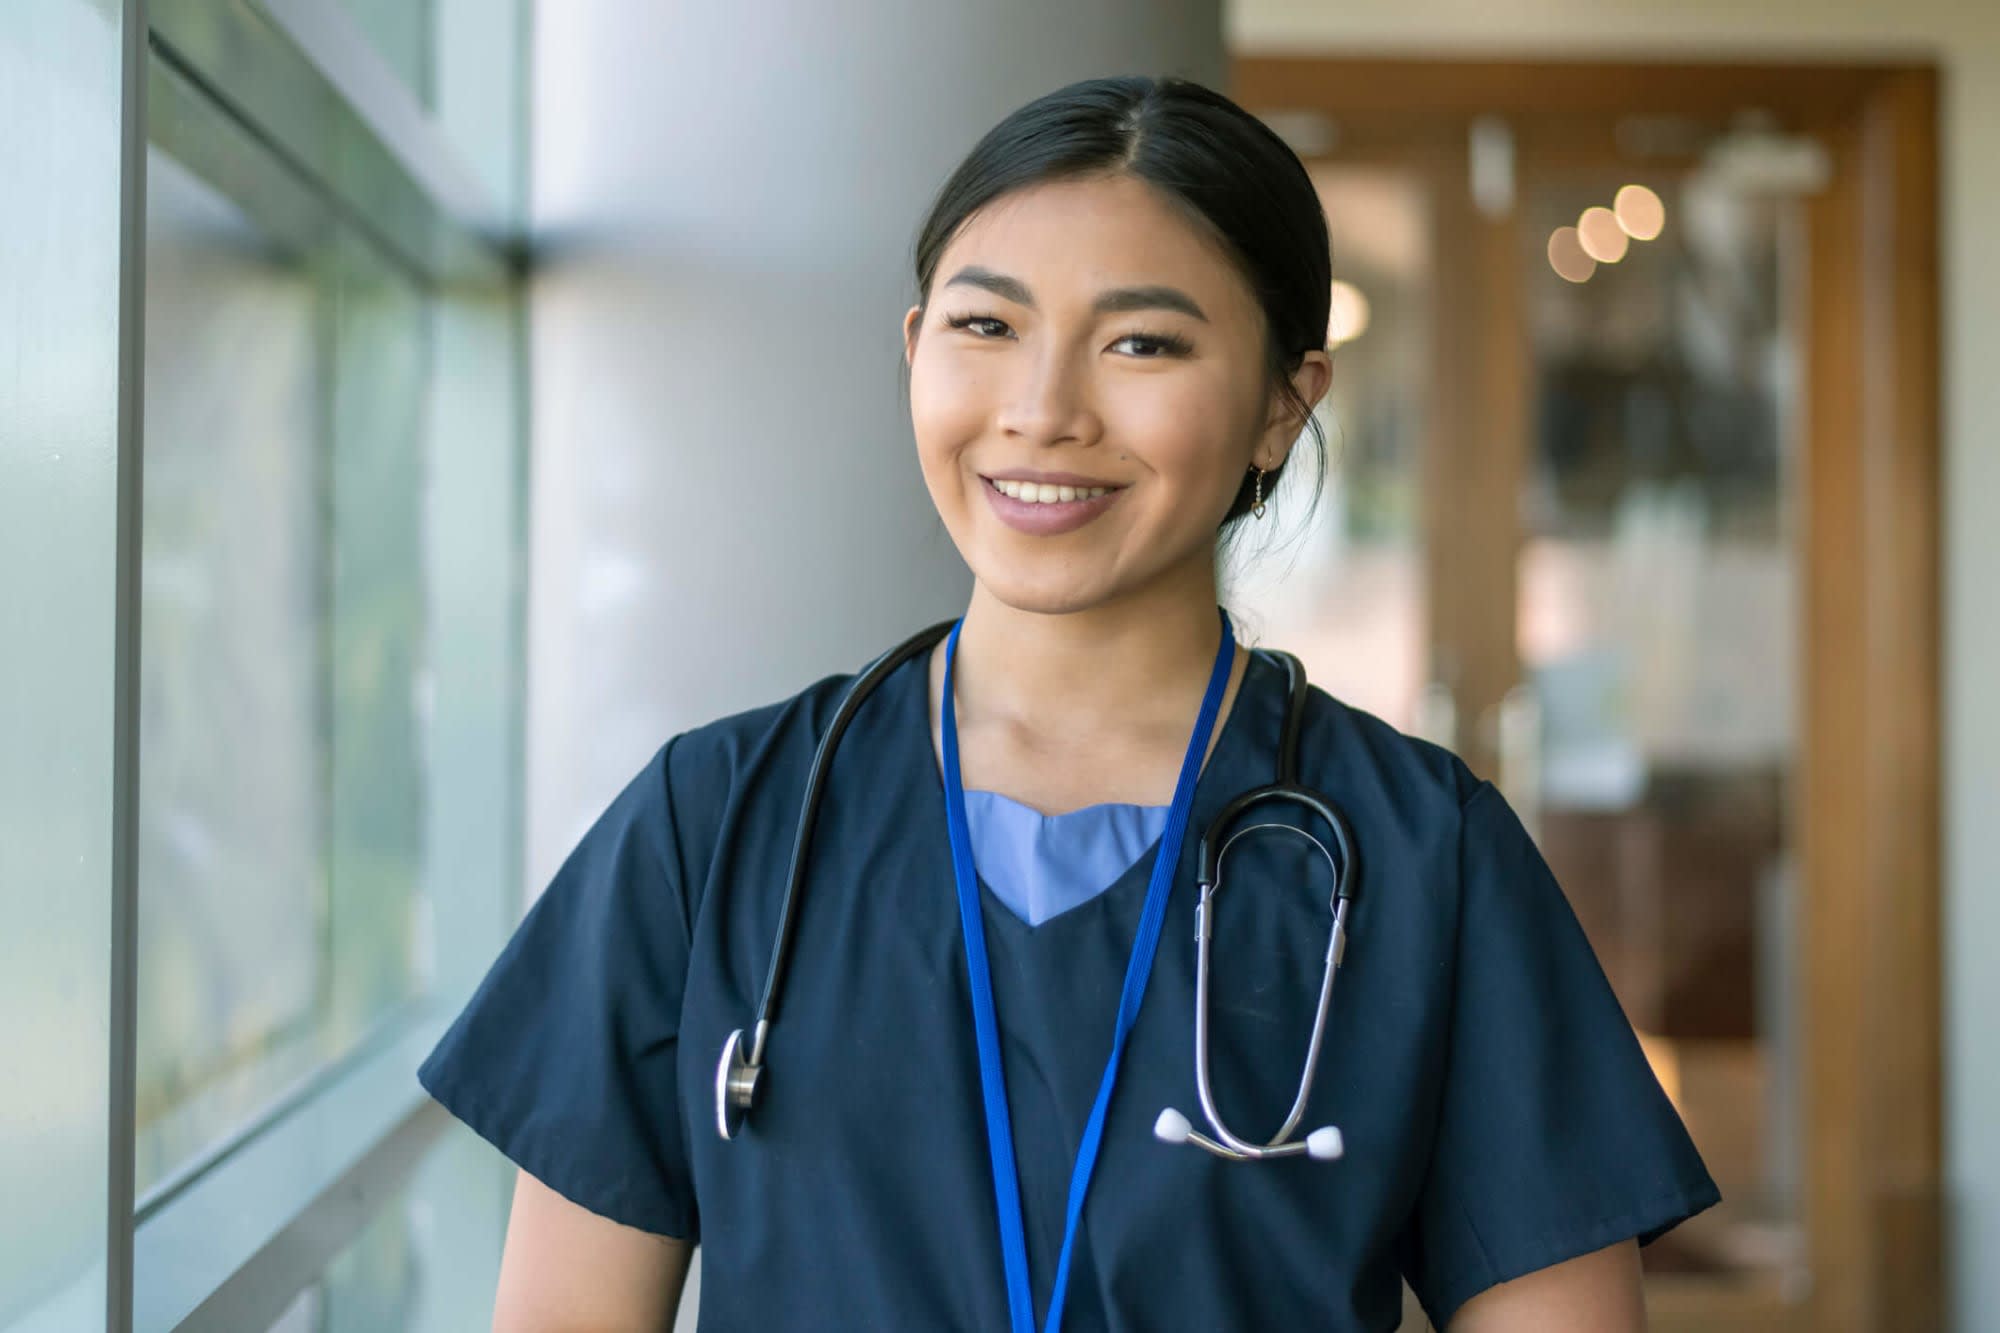 An Asian-American female nurse wearing scrubs and a stethoscope poses next to a window in a hospital corridor and smiles at the camera.